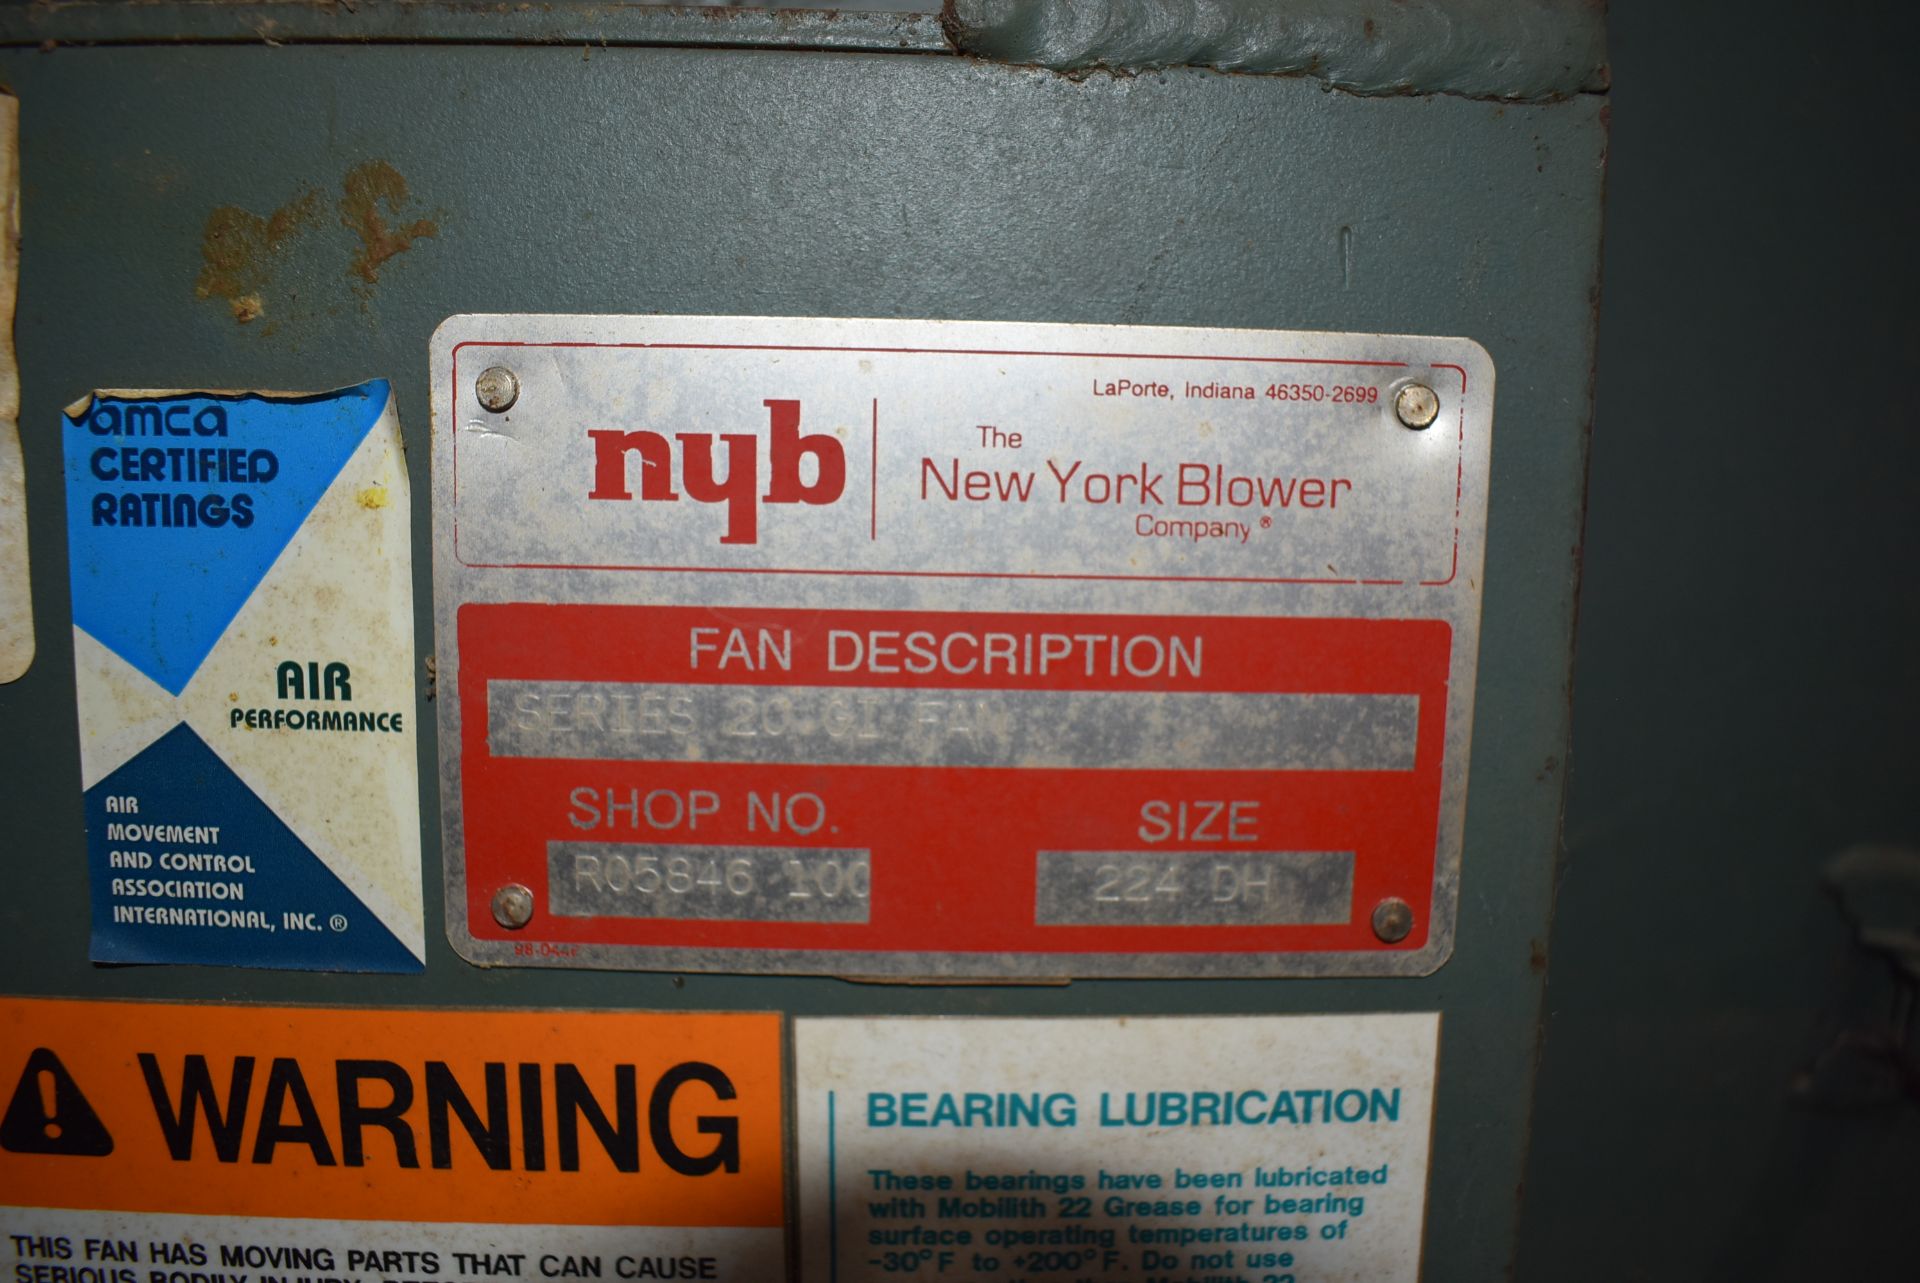 New York Blower, Series 20GI Fan, Size 224-DH, Does Not Include Motor. RIGGING/LOADING FEE $30 - Image 2 of 4